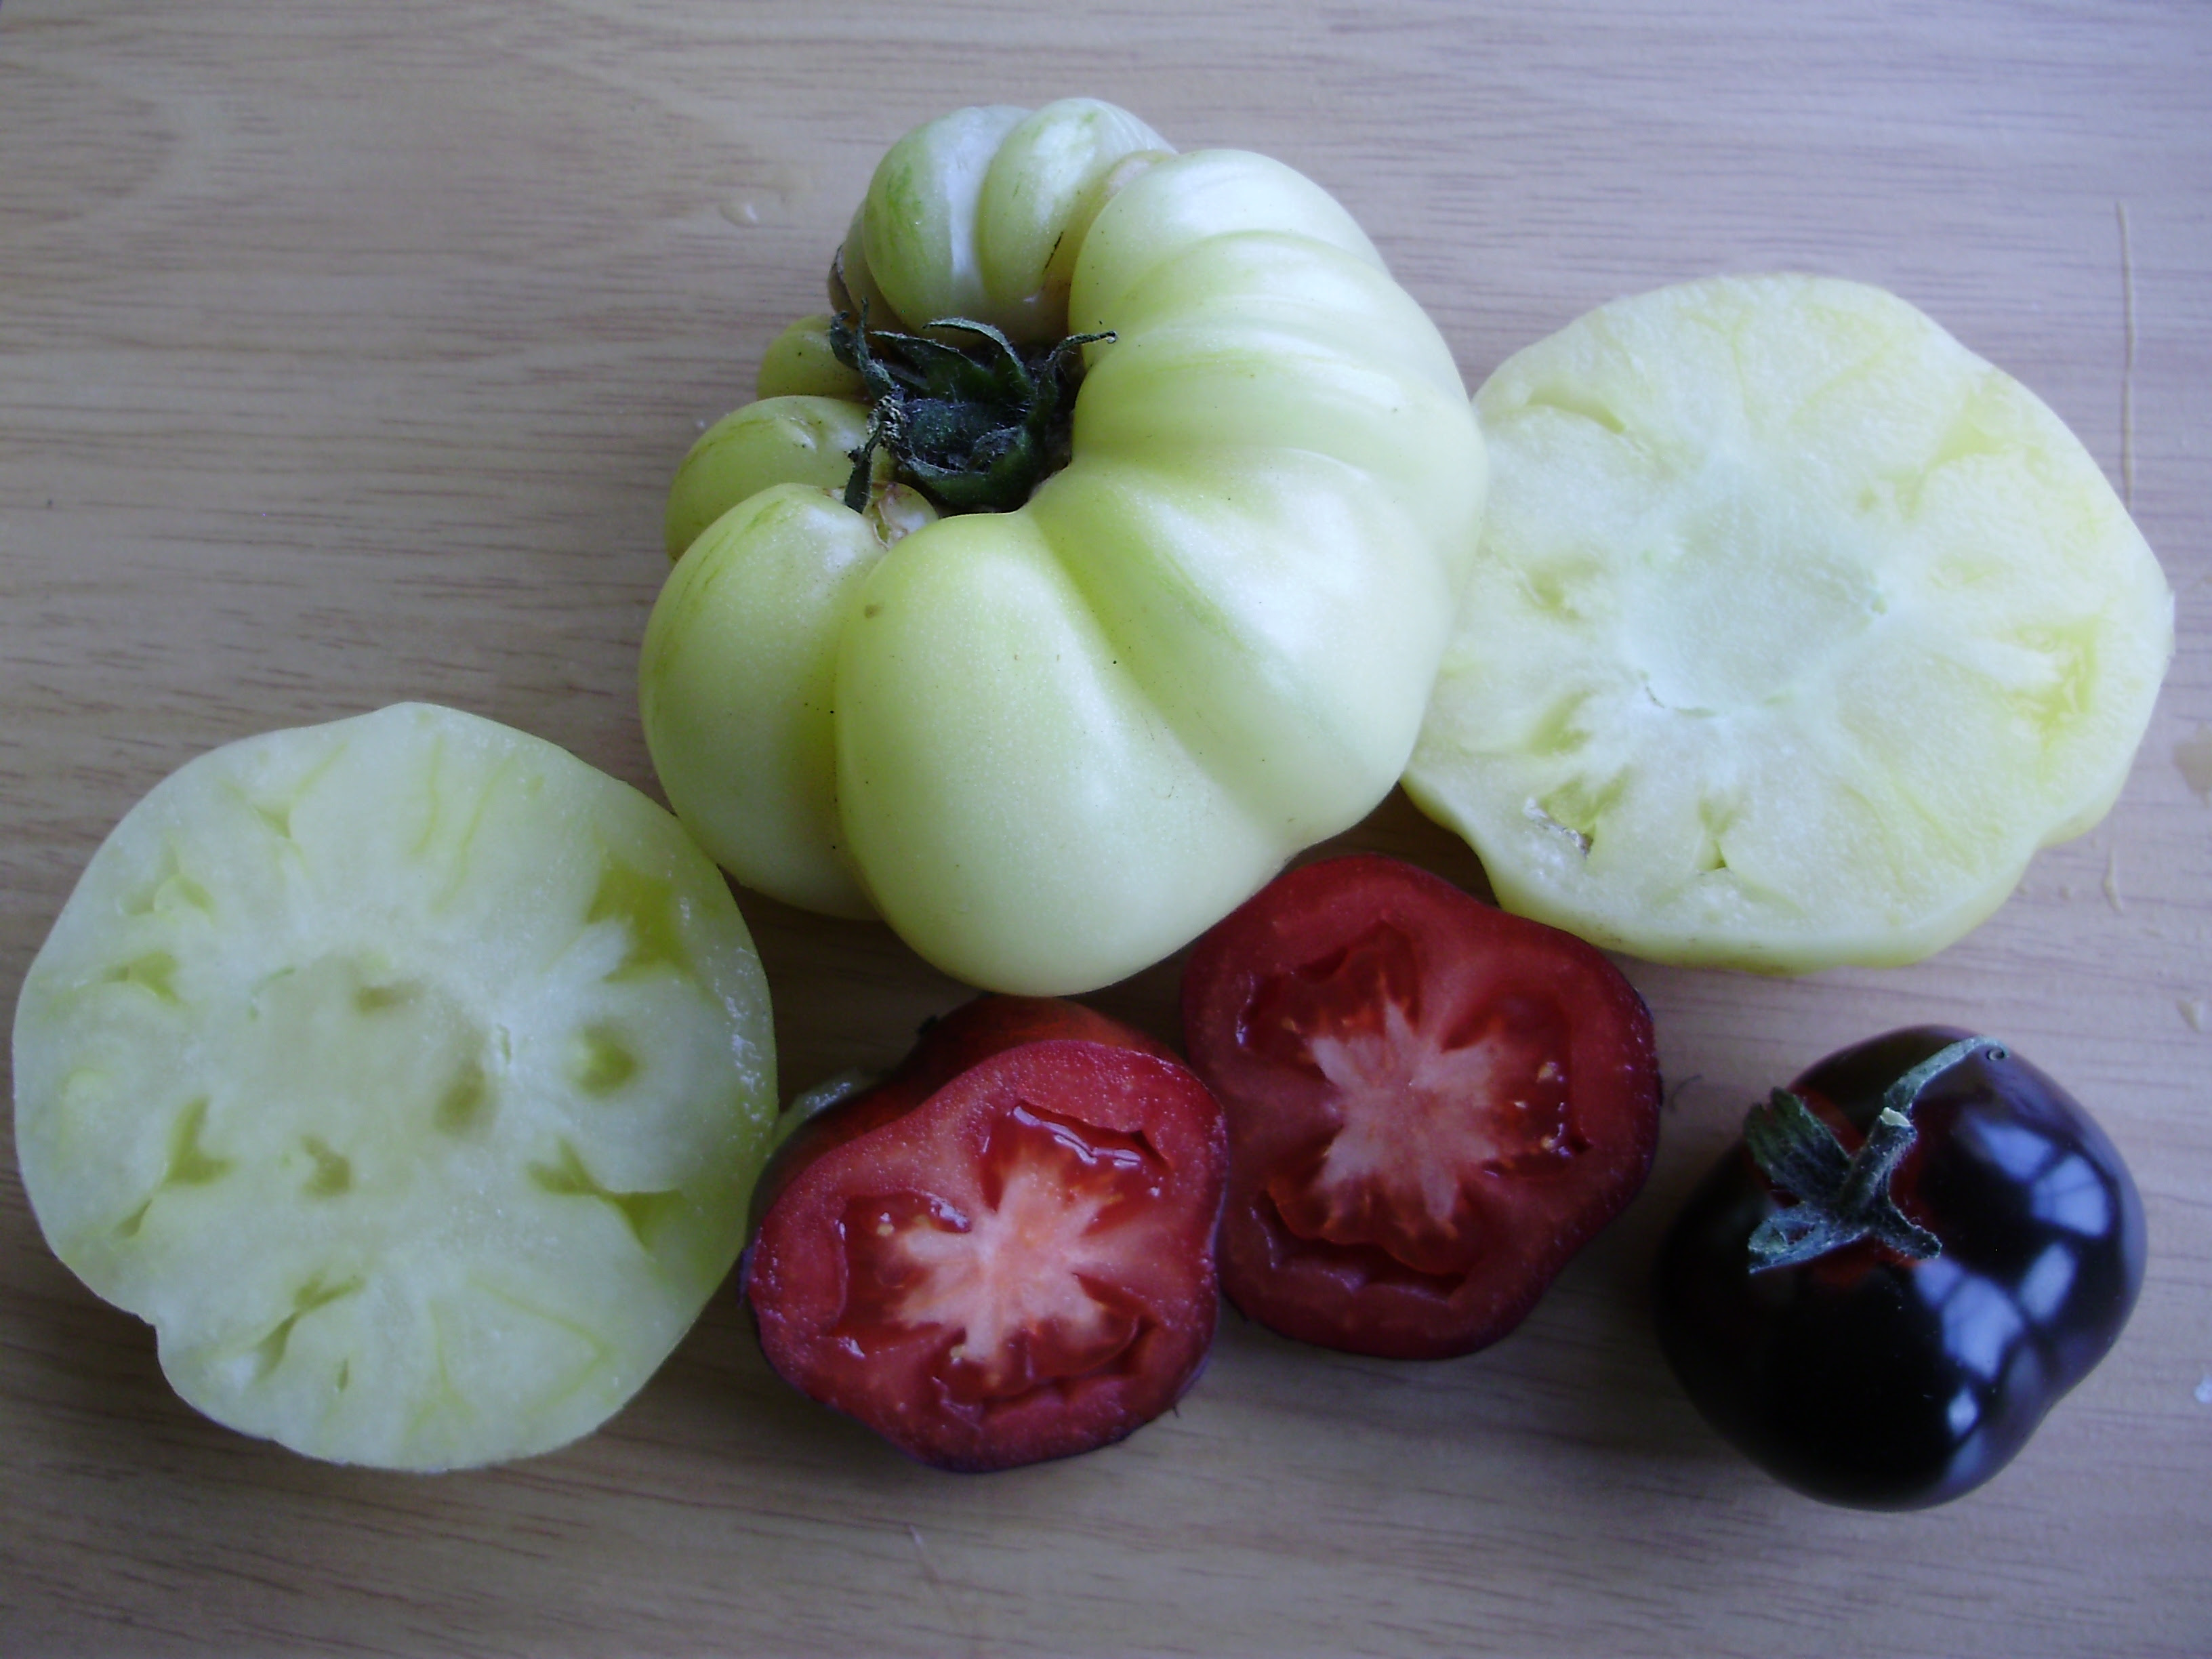 'Ebony and Ivory' - the contrasting colours of tomatoes Indigo Rose & White Queen